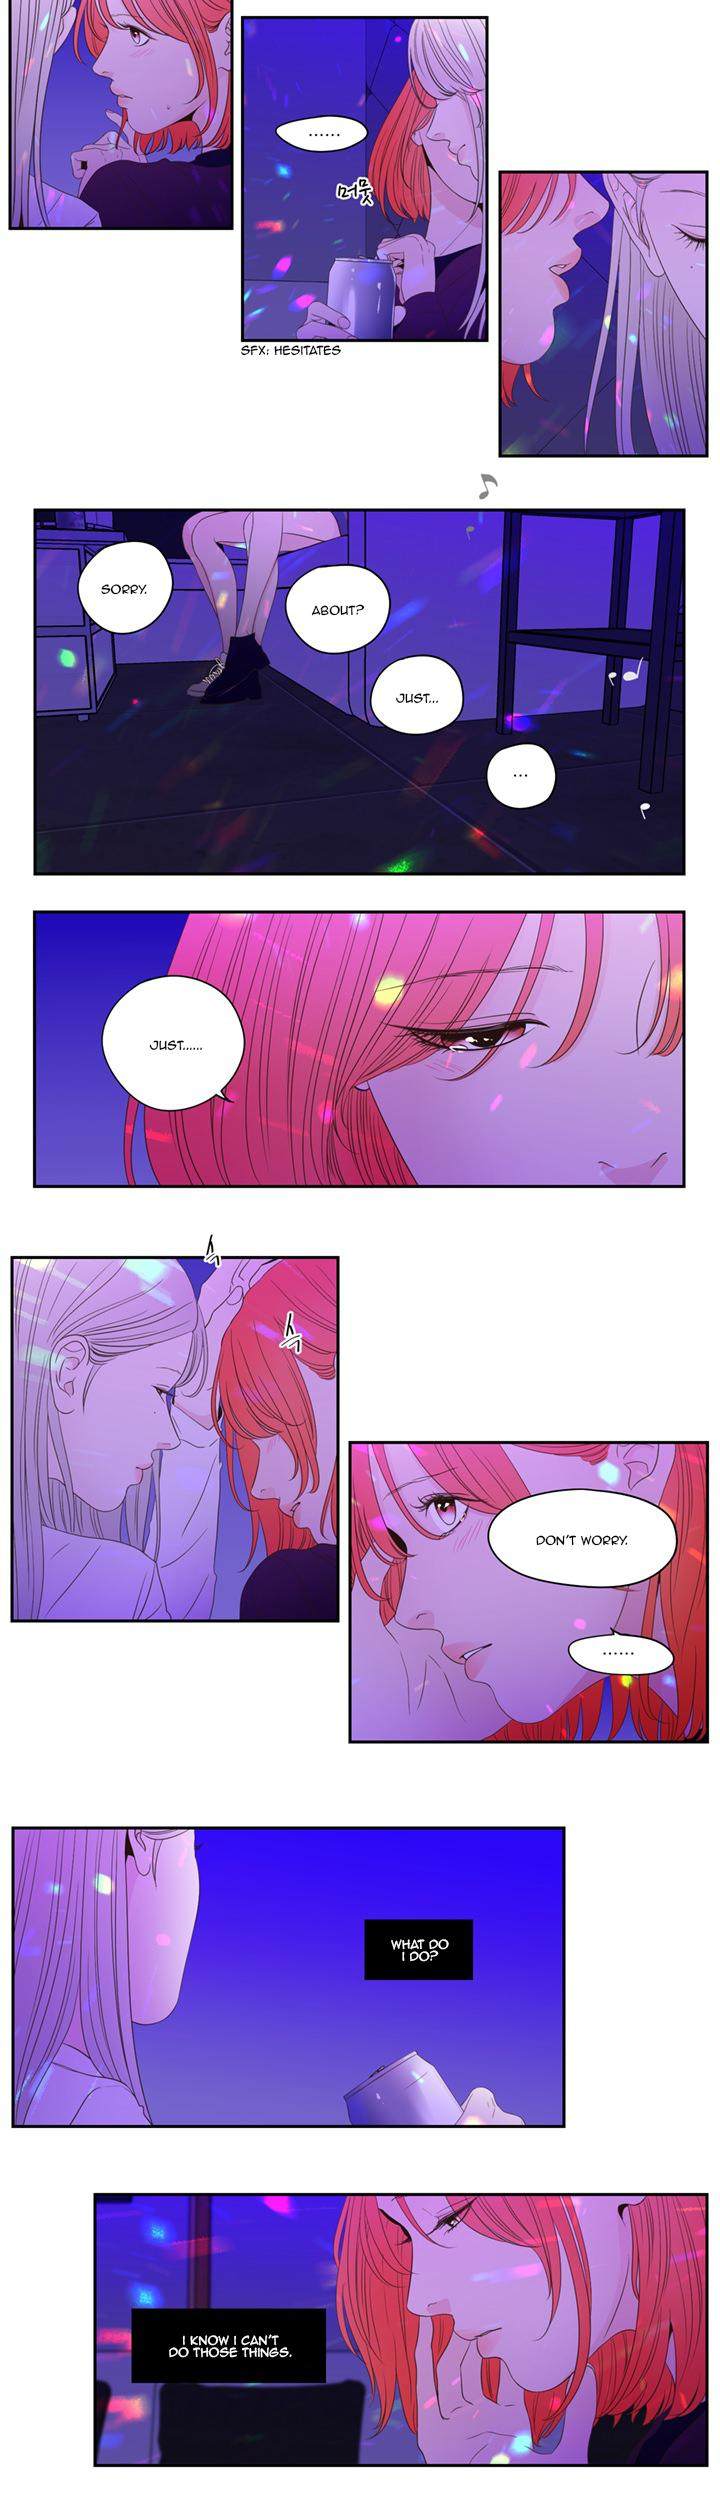 Pet’s Aesthetics - Chapter 4 Page 10